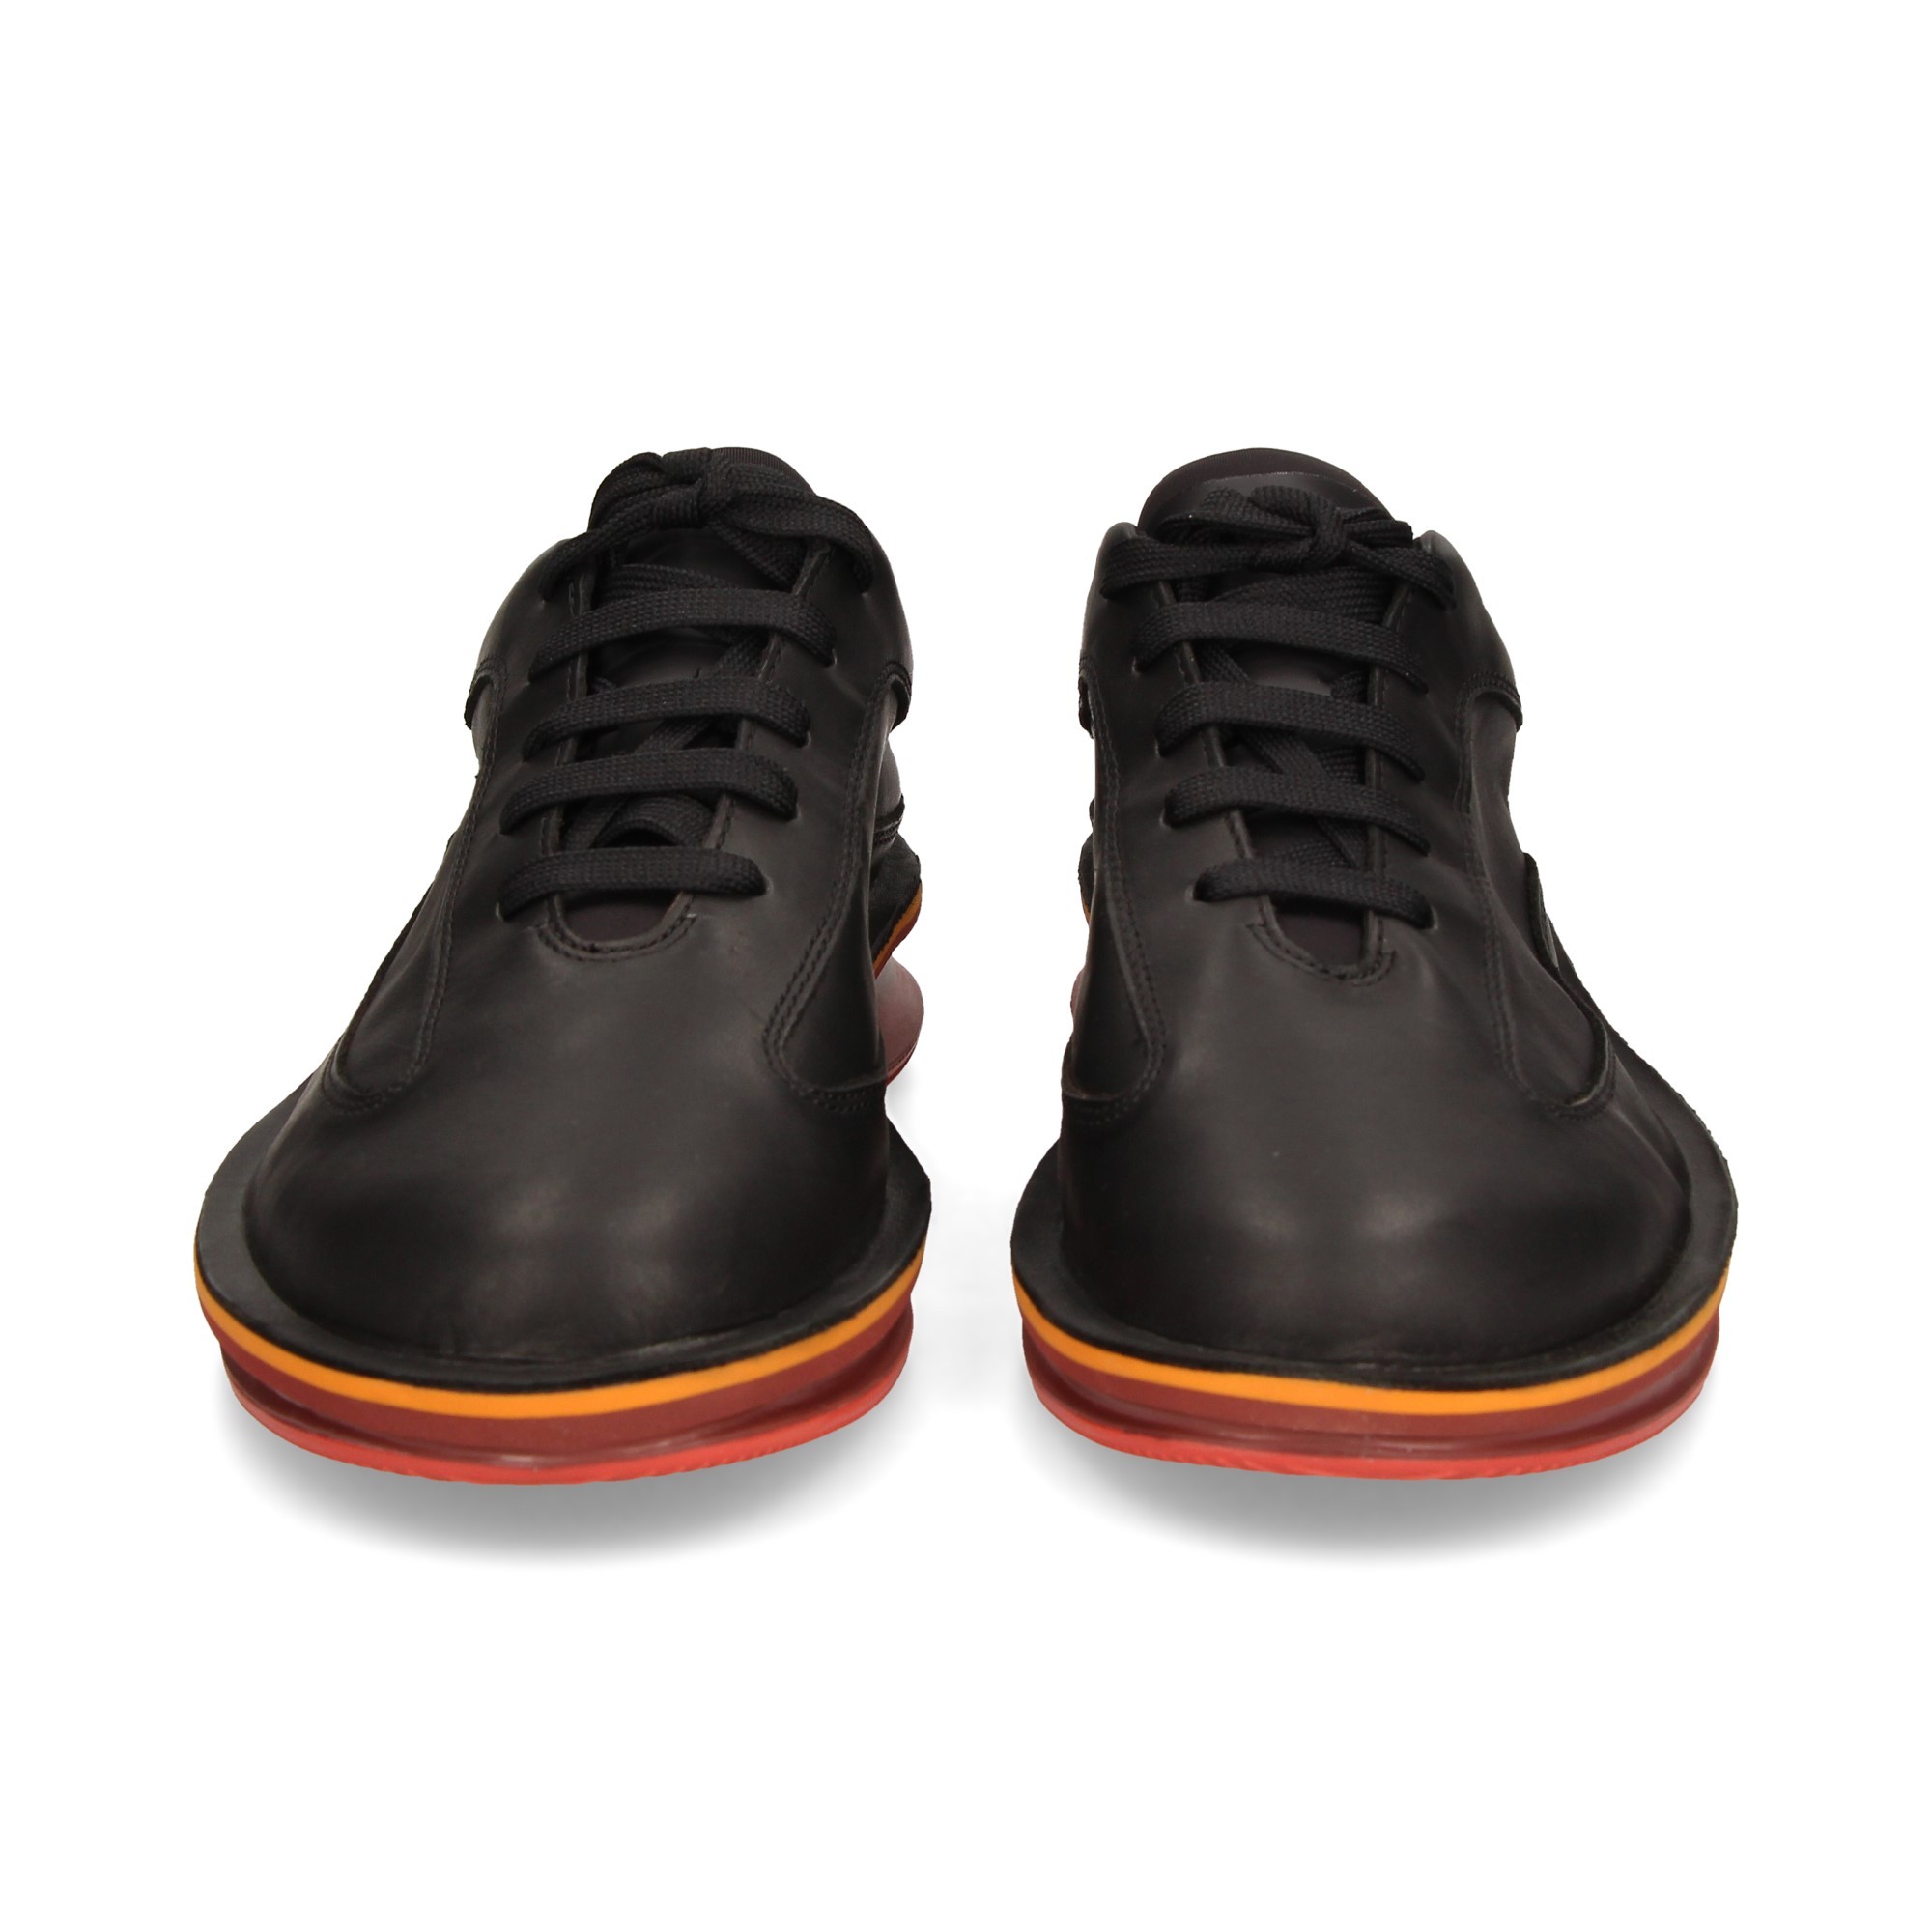 sporty-black-leather-red-sole